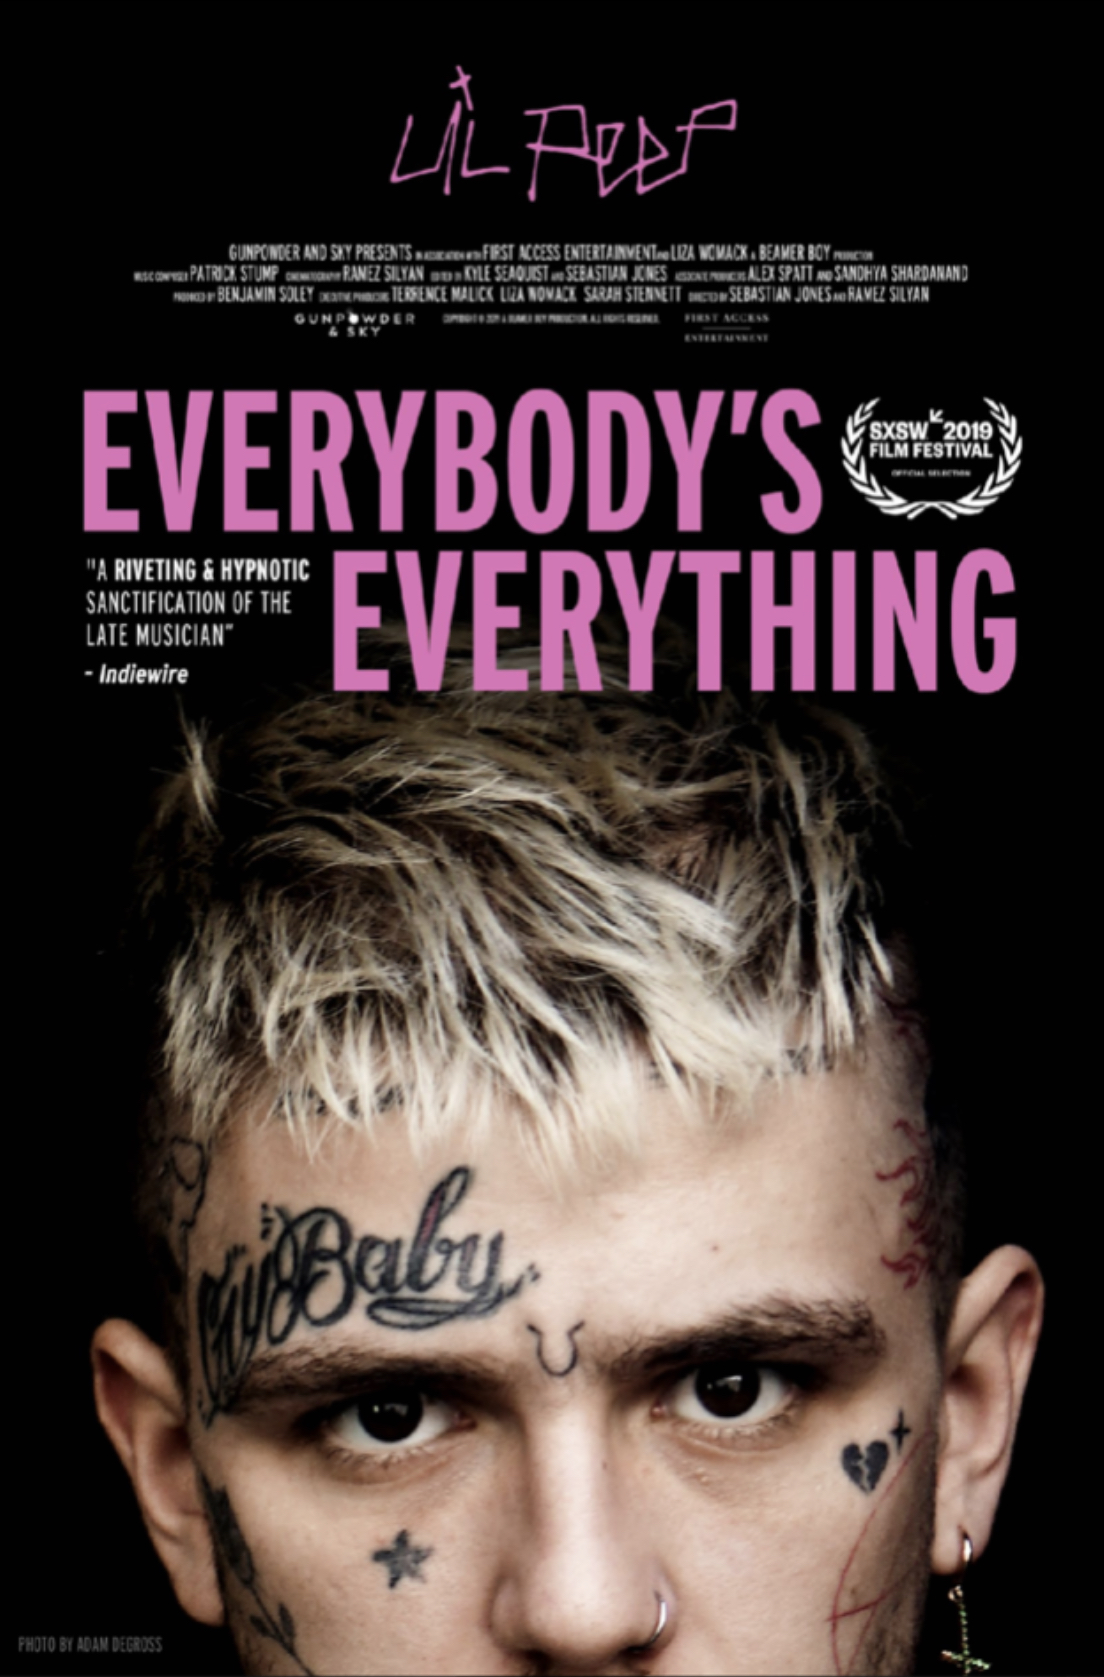 Lil-peep-Everybody's-everything-affiche